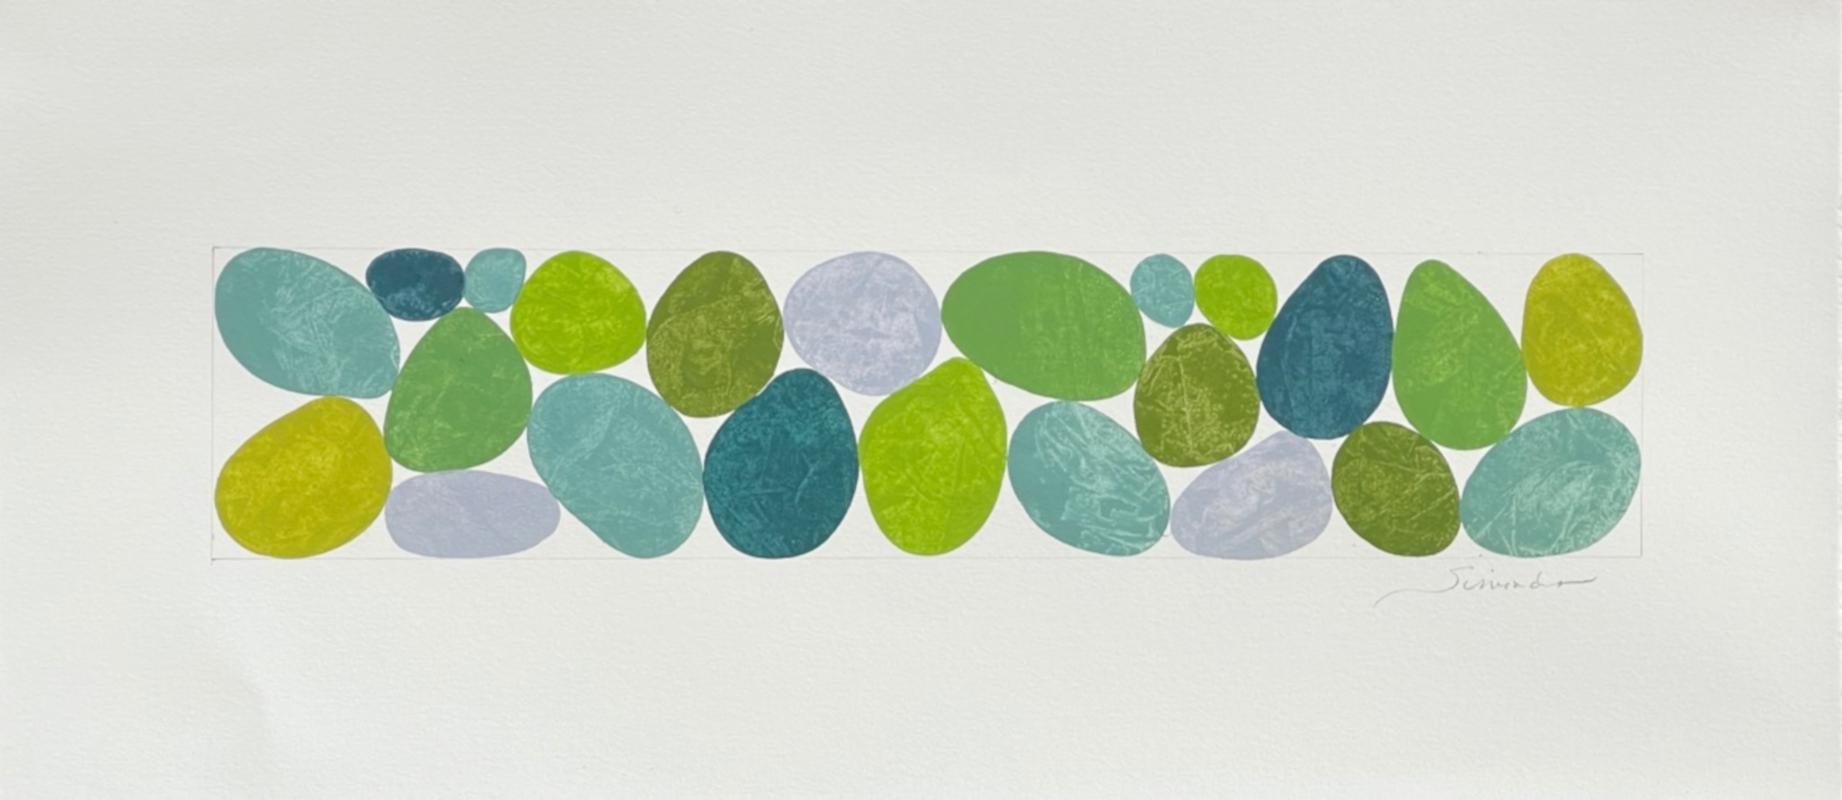 Moss Greens II is a unique Gouache on Paper artwork.   The image is 3 x 14 inches on 8 x 18 inch paper.  Es ist ungerahmt.   It is a horizontal artwork.   It was created in 2020.  It is signed.

Laut der Bostoner Künstlerin Nancy Simonds: 